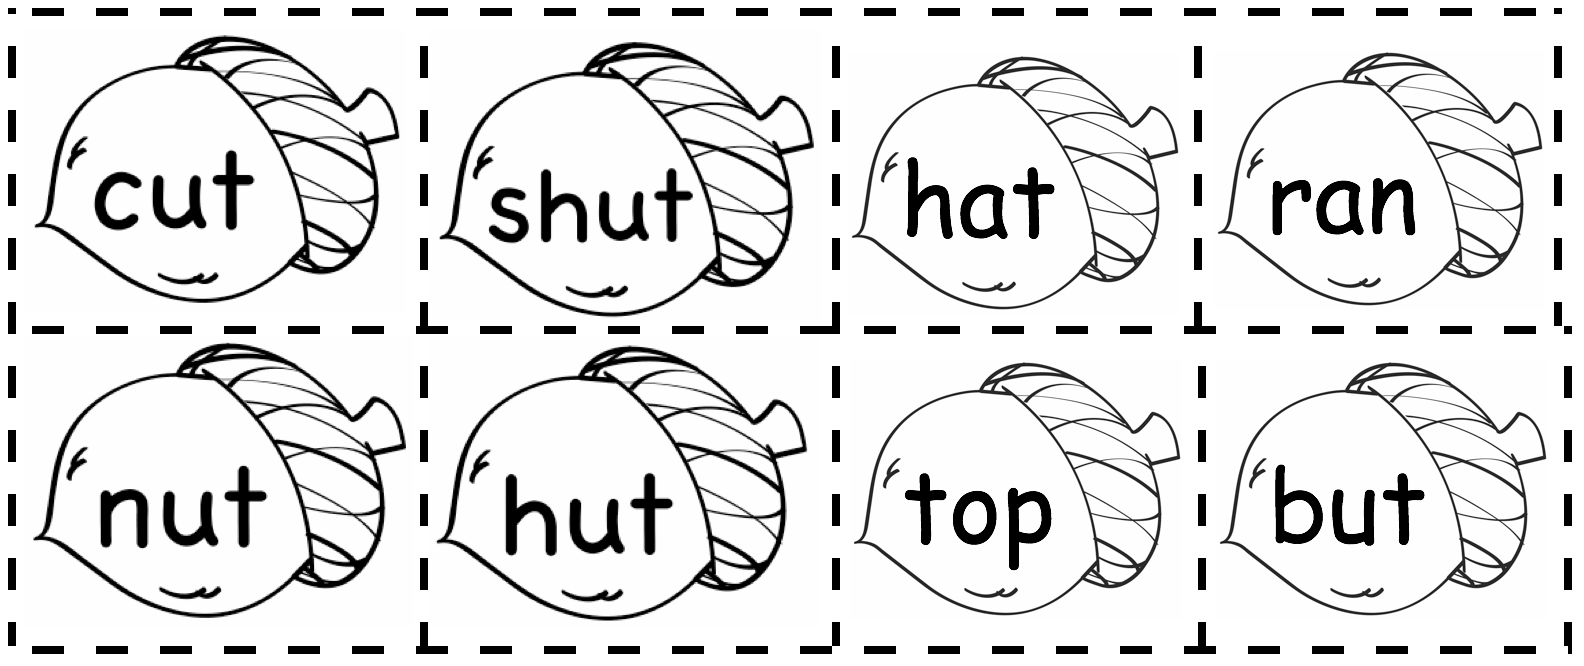 nut-word-cards